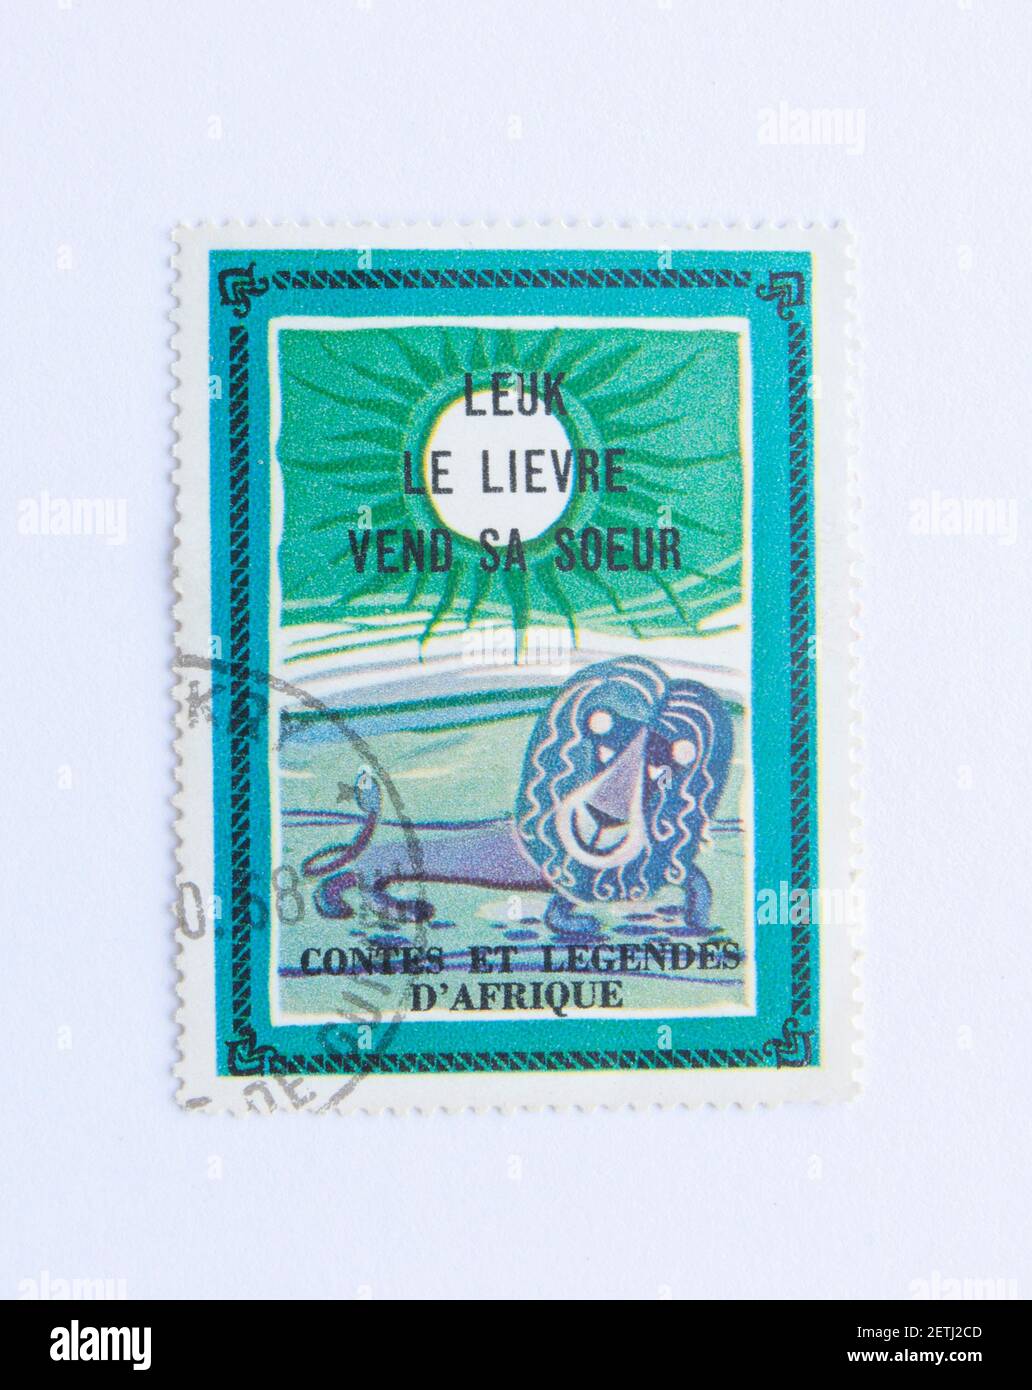 01.03.2021 Istanbul Turkey. Guinea Republic Postage Stamp. circa 1968. leuk the lievre sells his sister Stock Photo